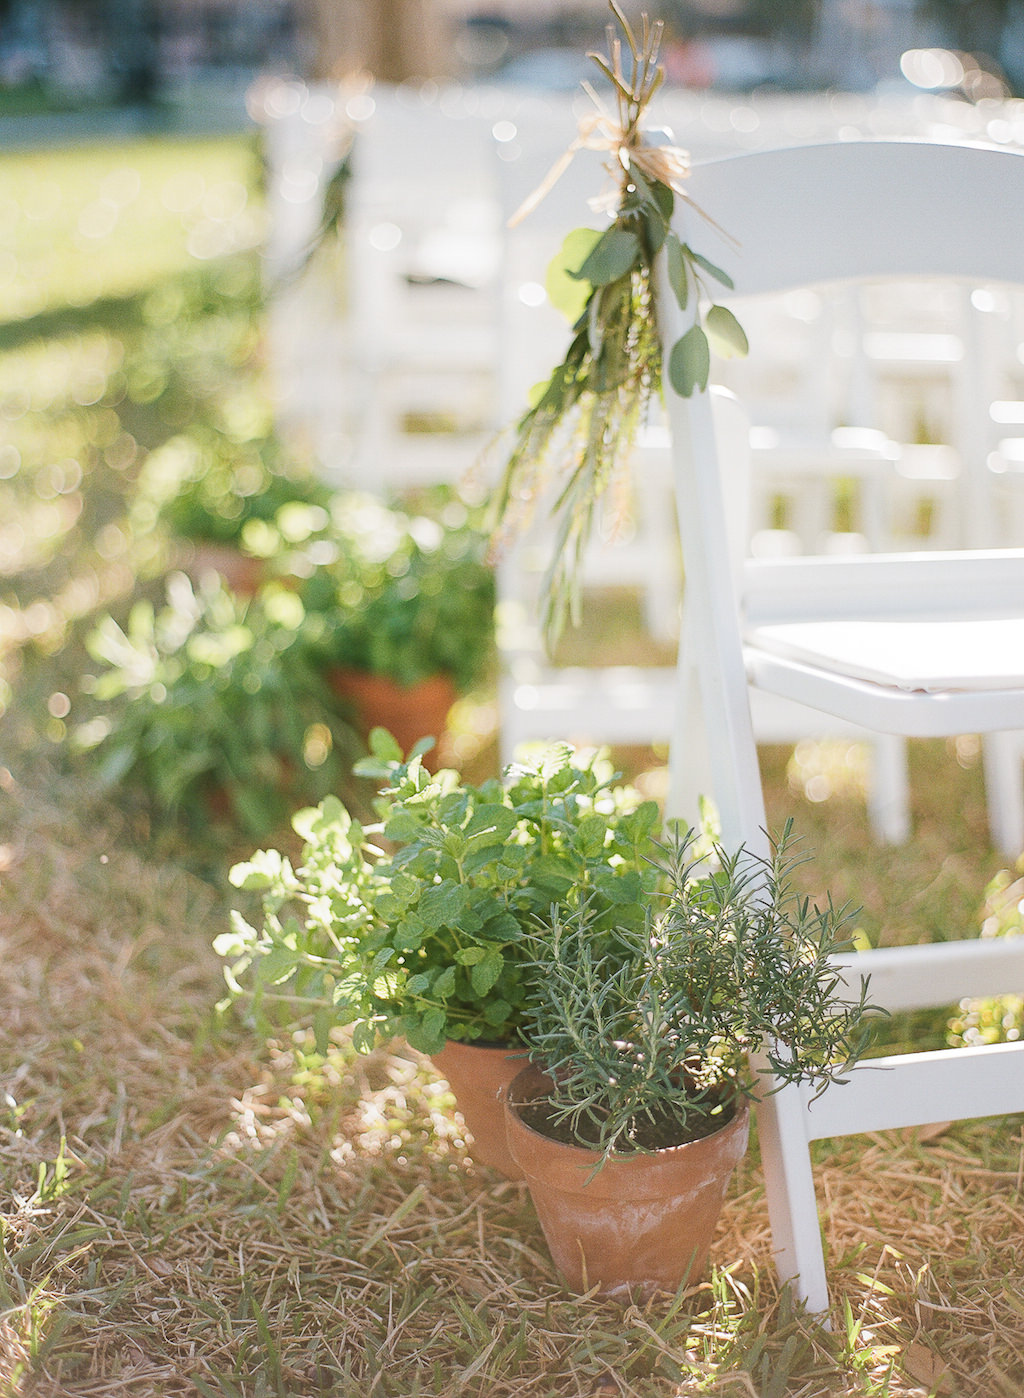 Natural Organic Outdoor Wedding Ceremony Decor with Ceramic Pots of Fresh Herbs, Greenery Bundles and Folding White Chairs | Tampa Bay Wedding